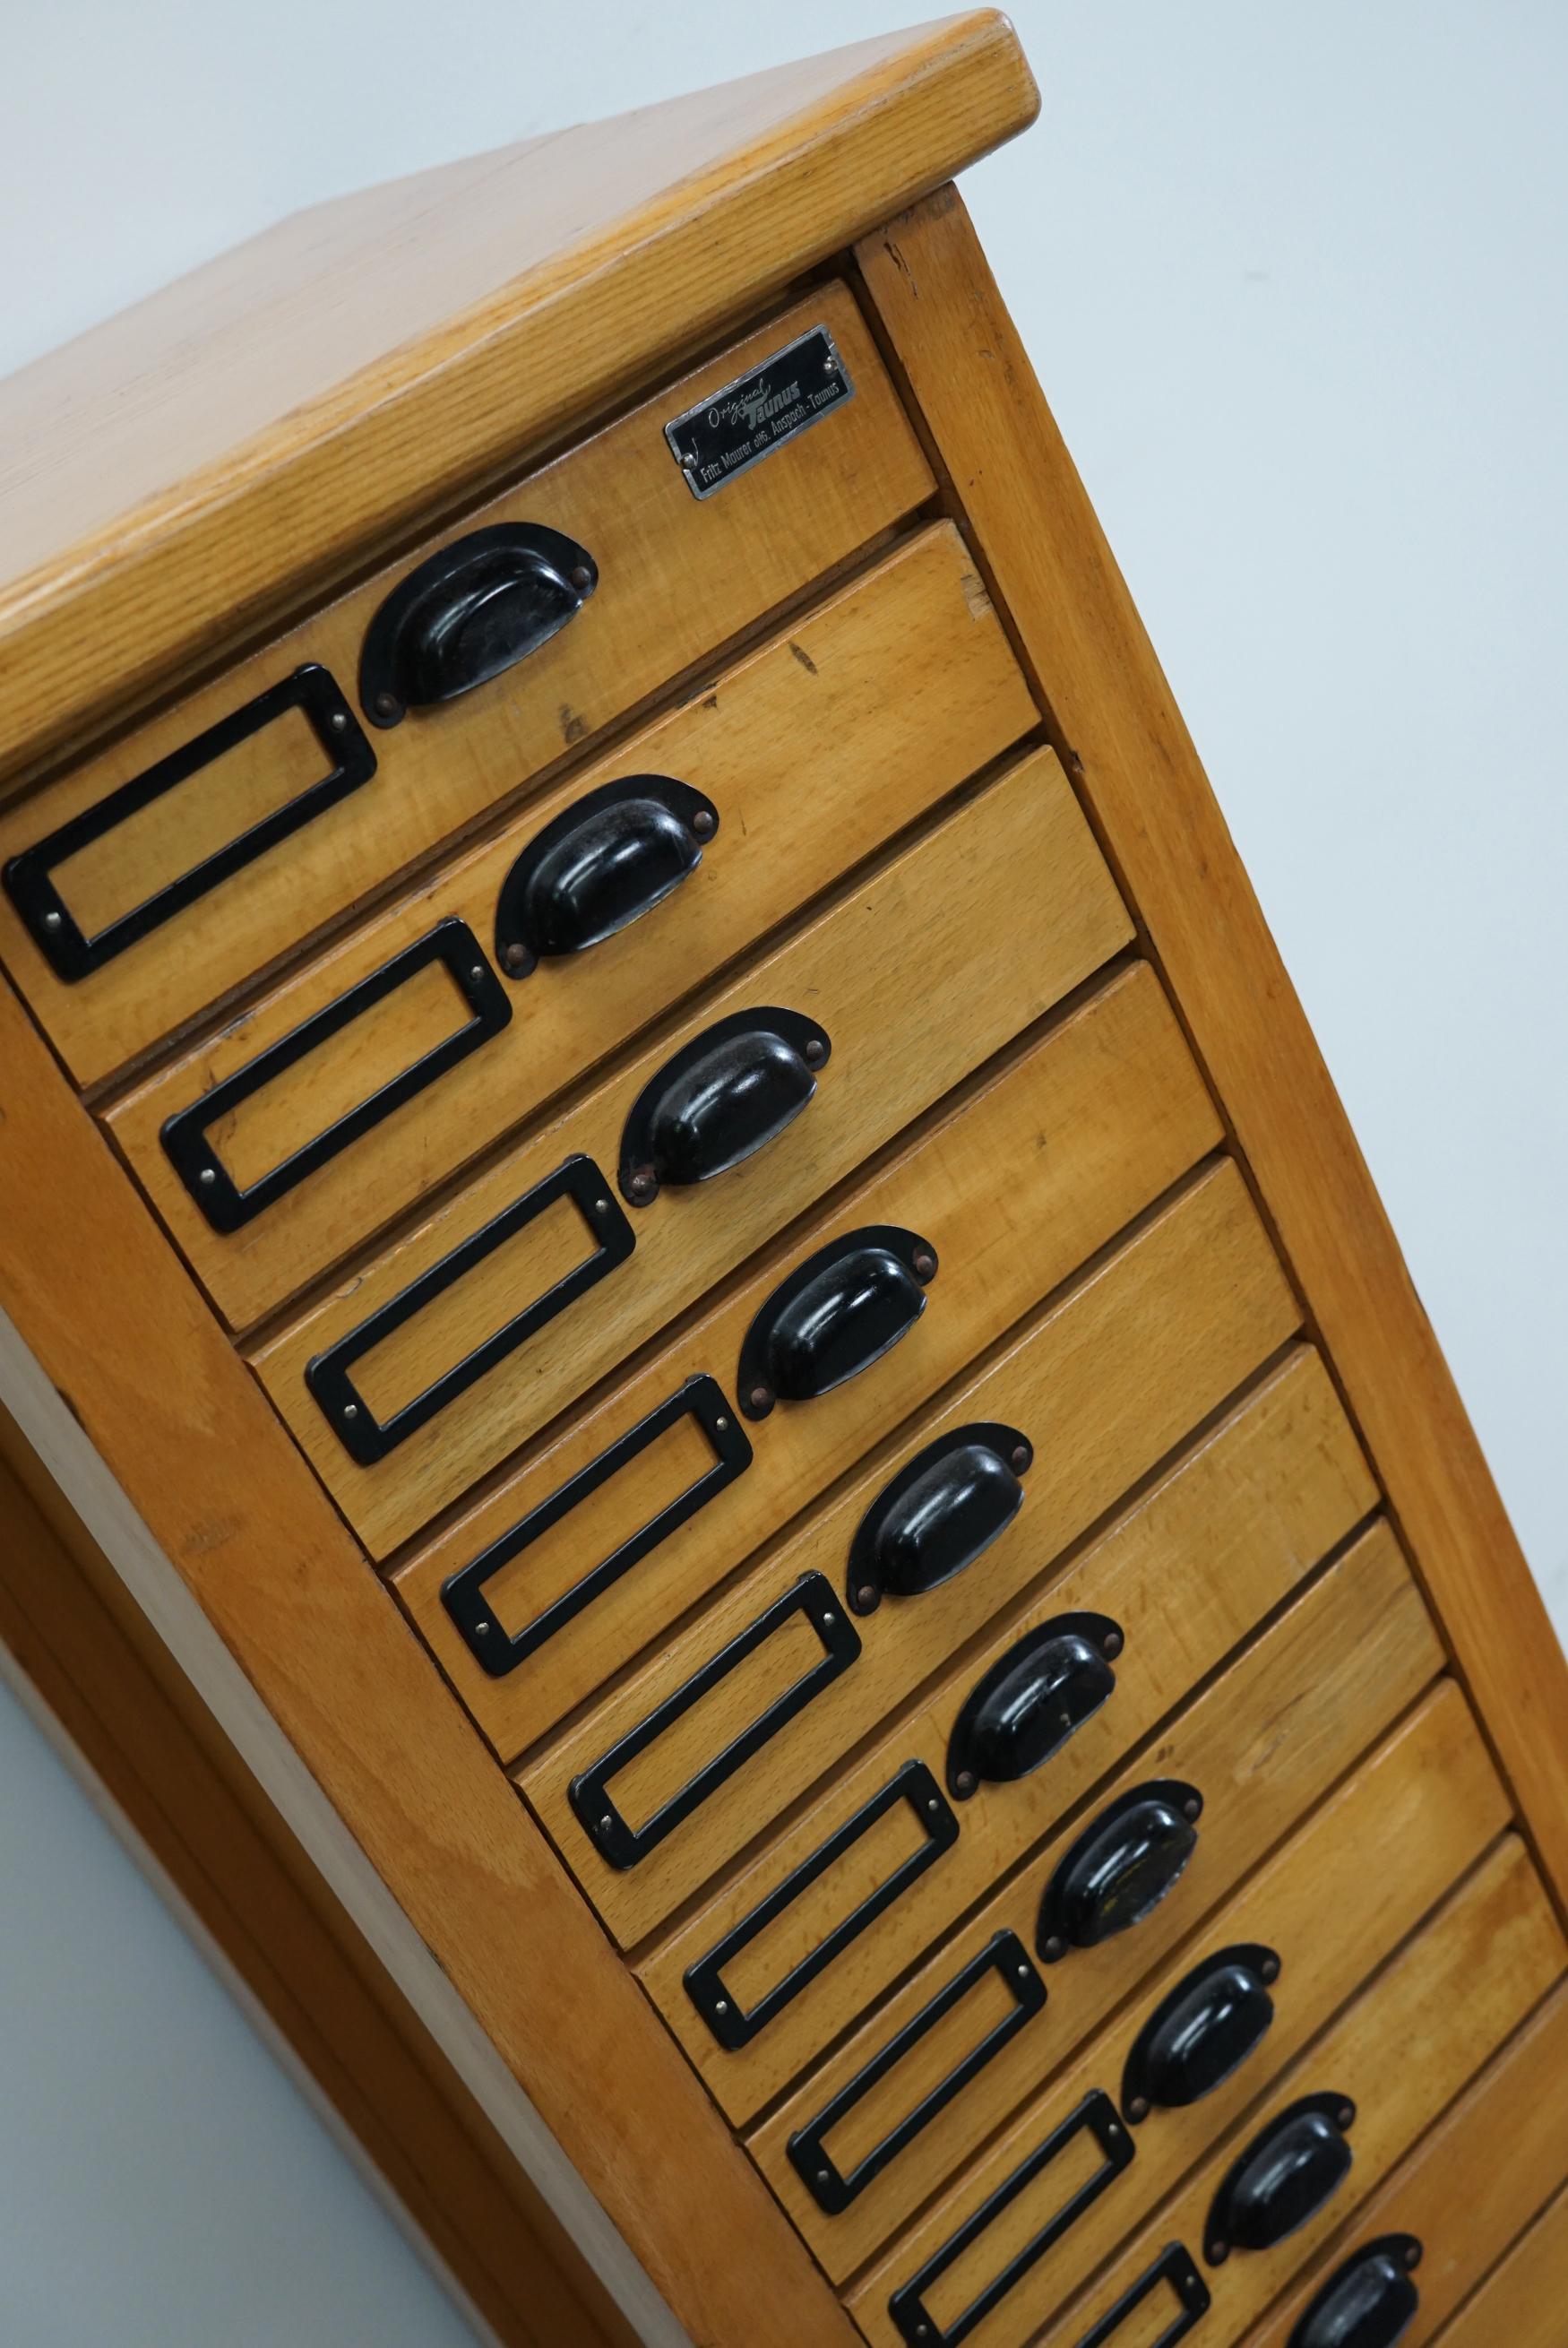 This apothecary cabinet was made circa 1950s in Germany. It features small drawers with nice hardware. It is made from beech and oak. The interior dimensions of the drawers are: D x W x H 29 x 23 x 4 cm.
   